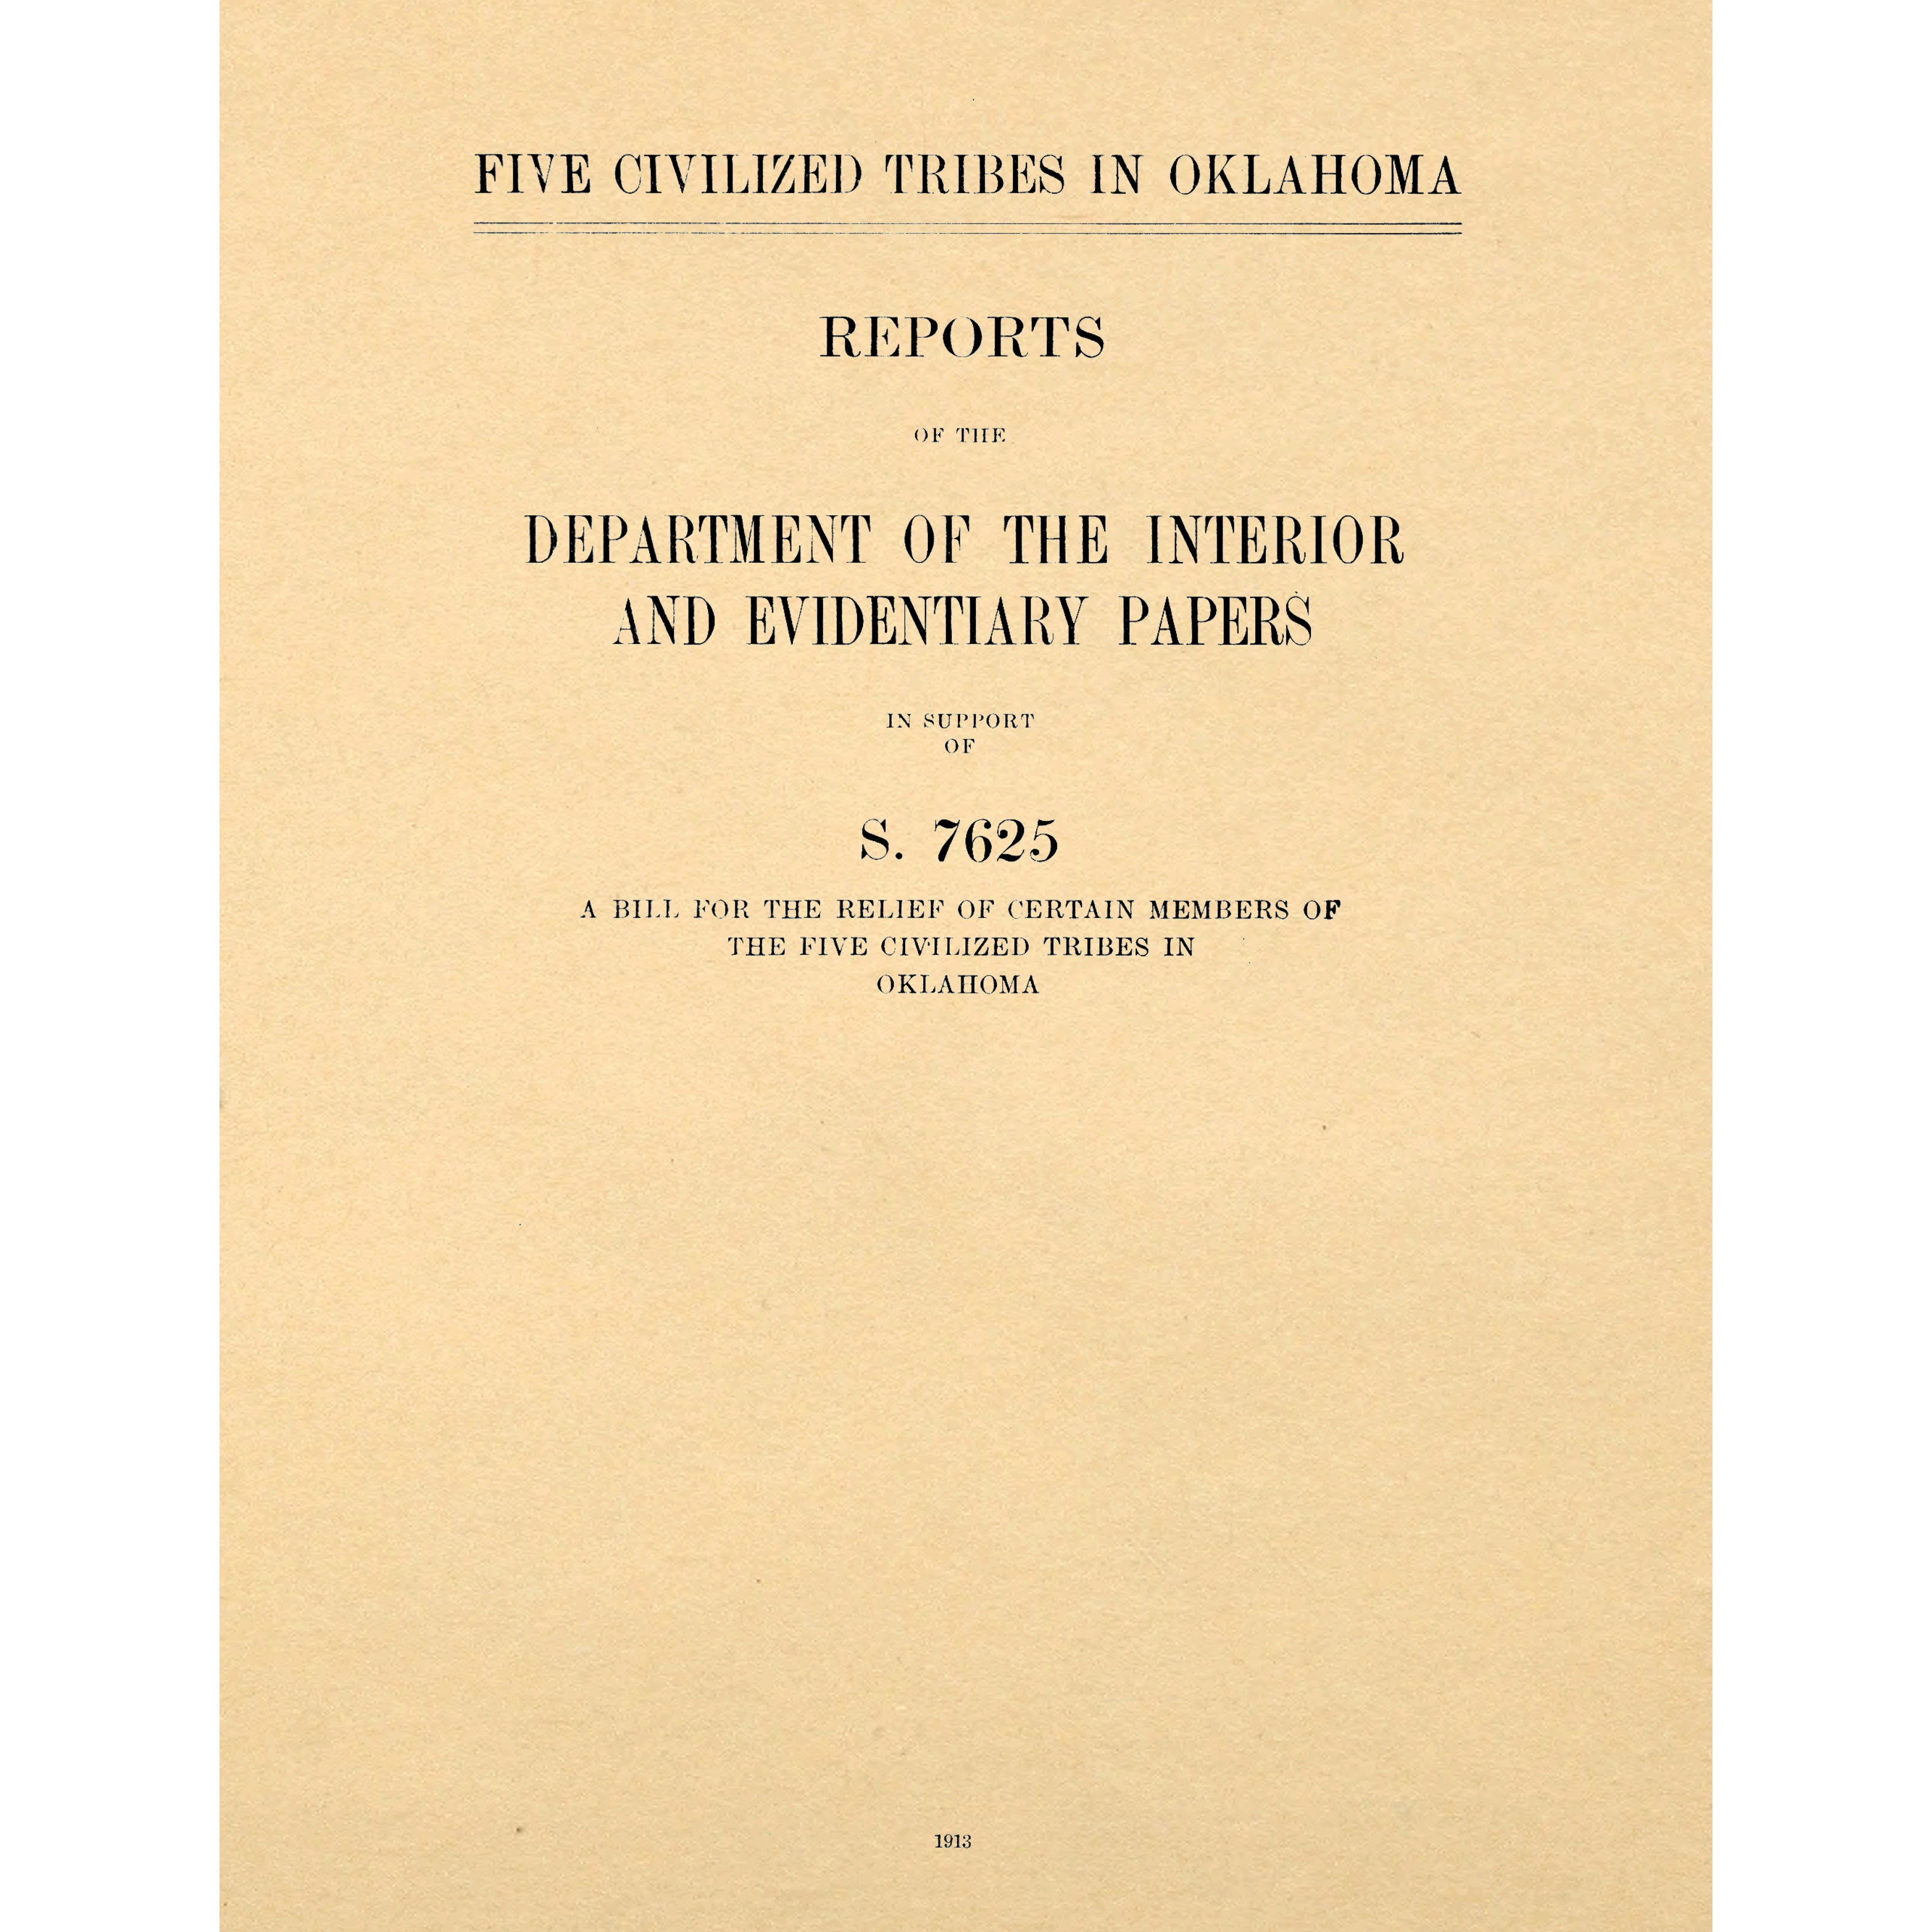 Five Civilized Tribes in Oklahoma; [1913 Supplement to the Dawes Rolls]